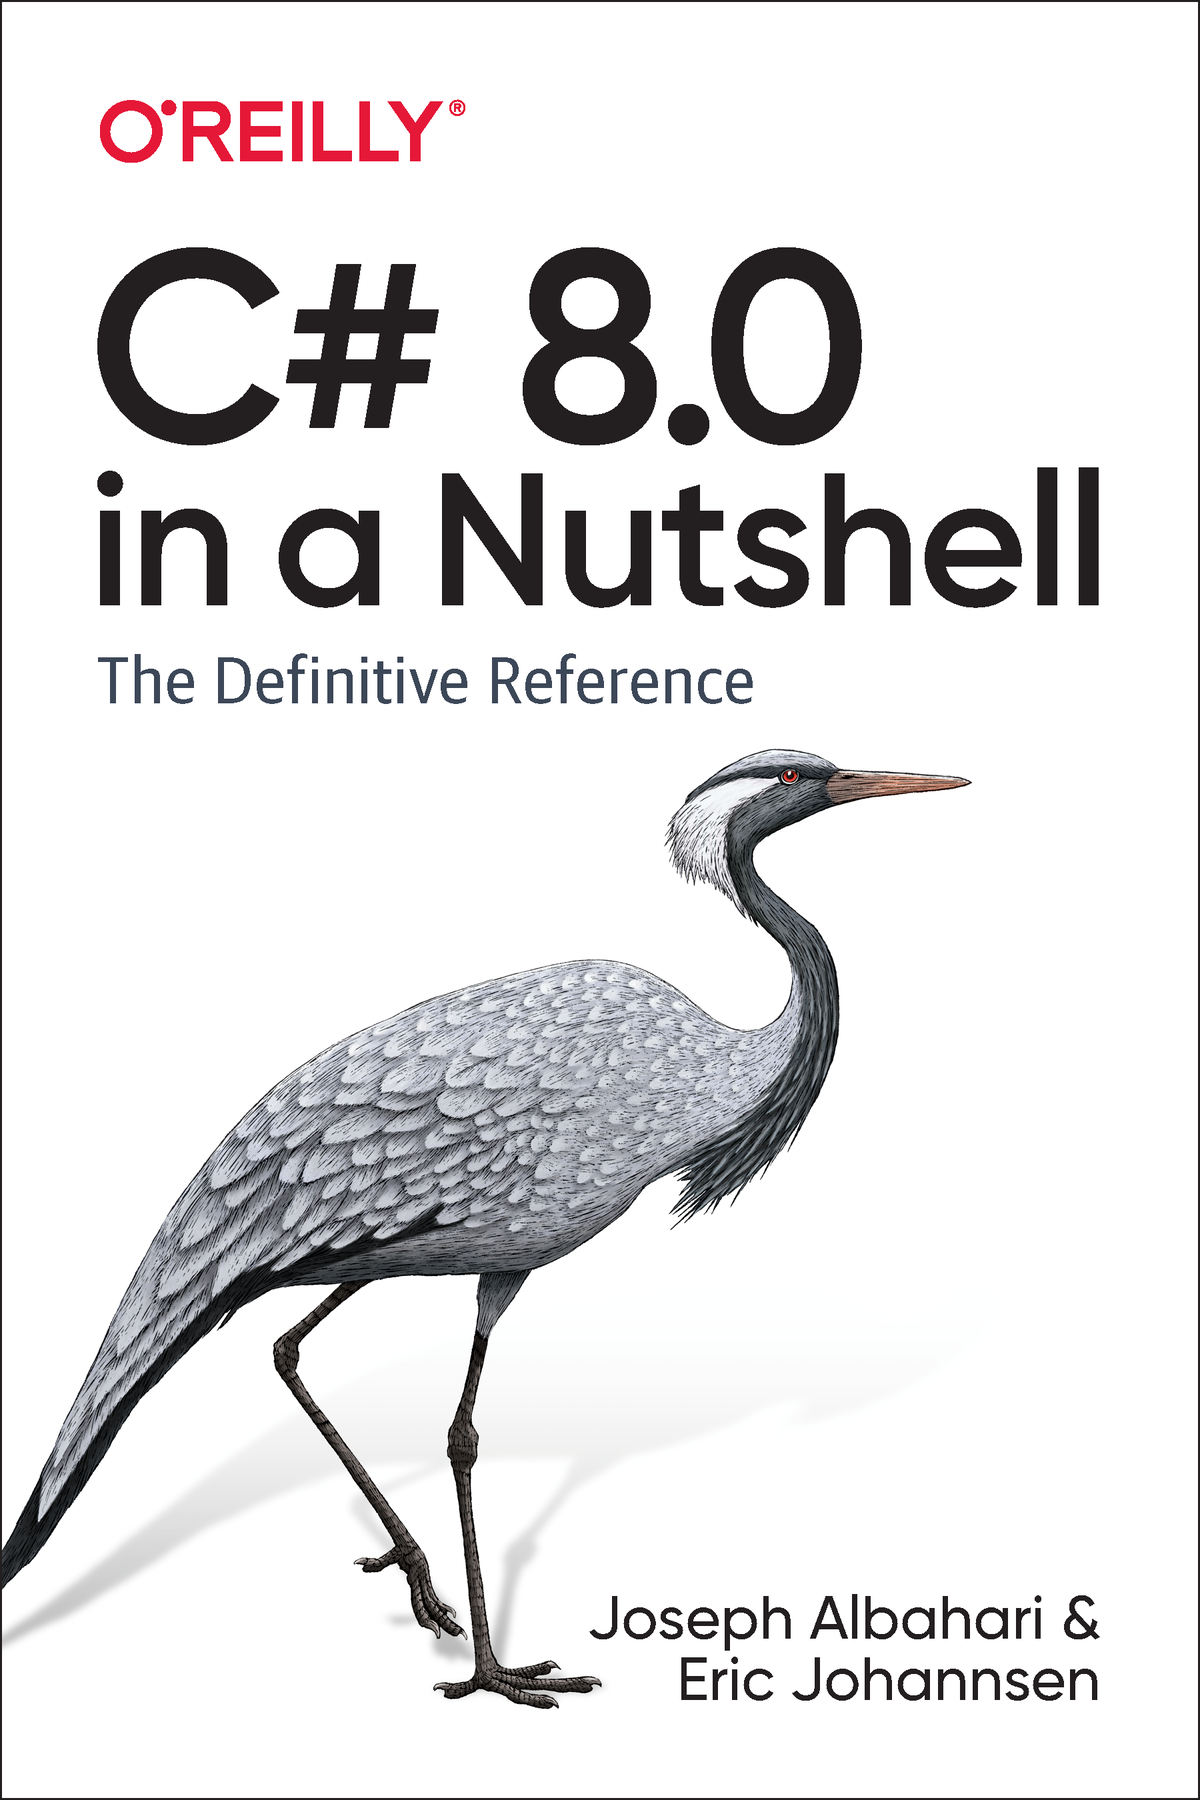 C 80 in a Nutshell by Joseph Albahari and Eric Johannsen Copyright 2020 - photo 1